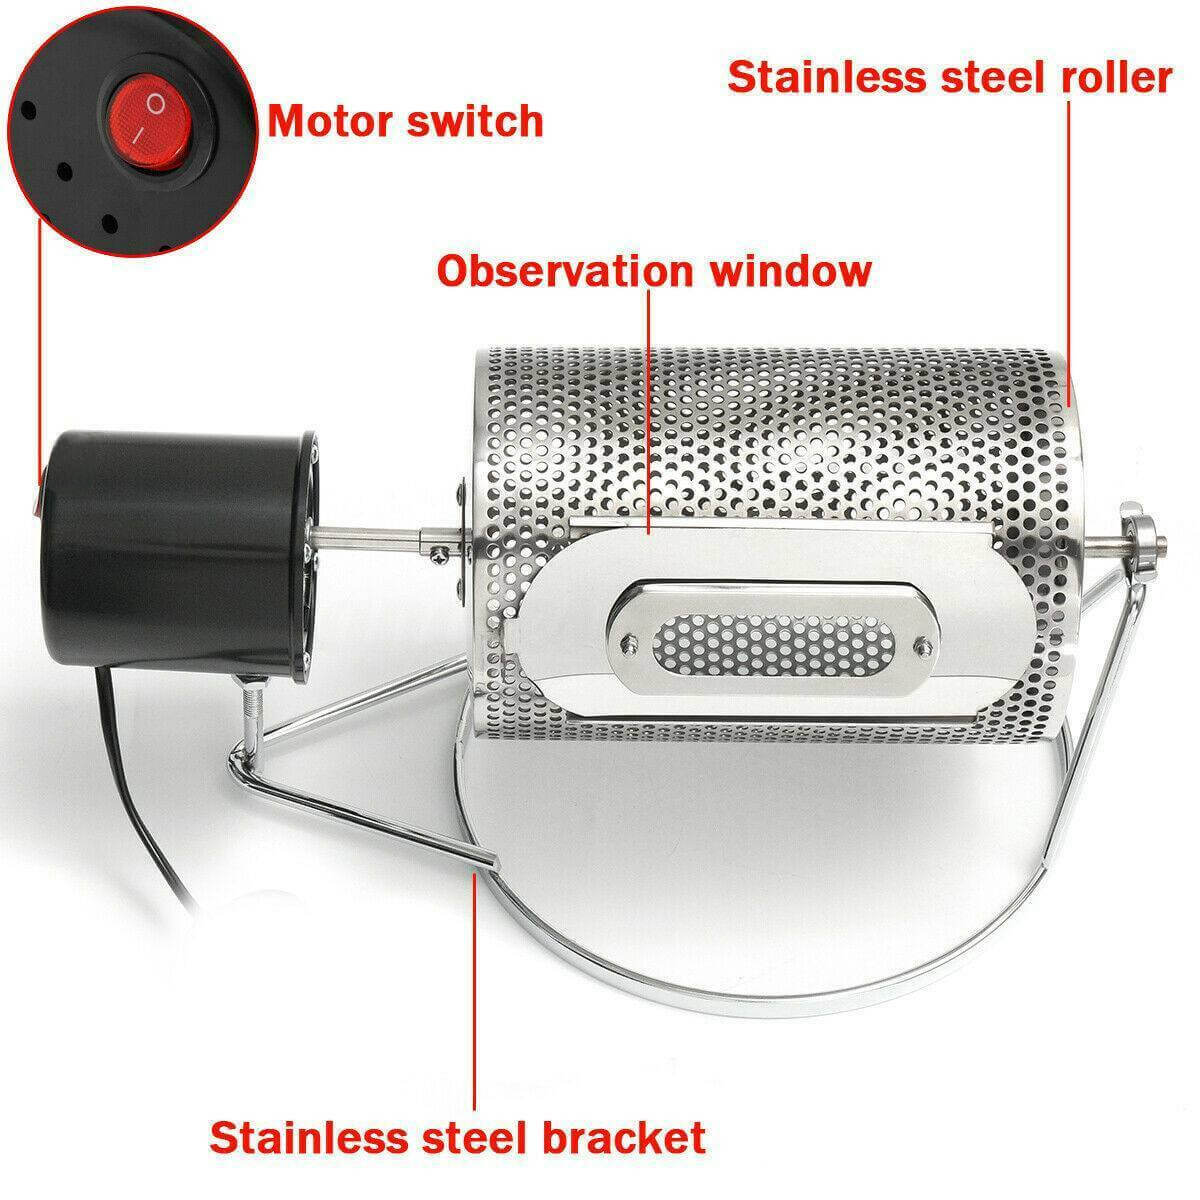 Features of stainless steel coffee roaster